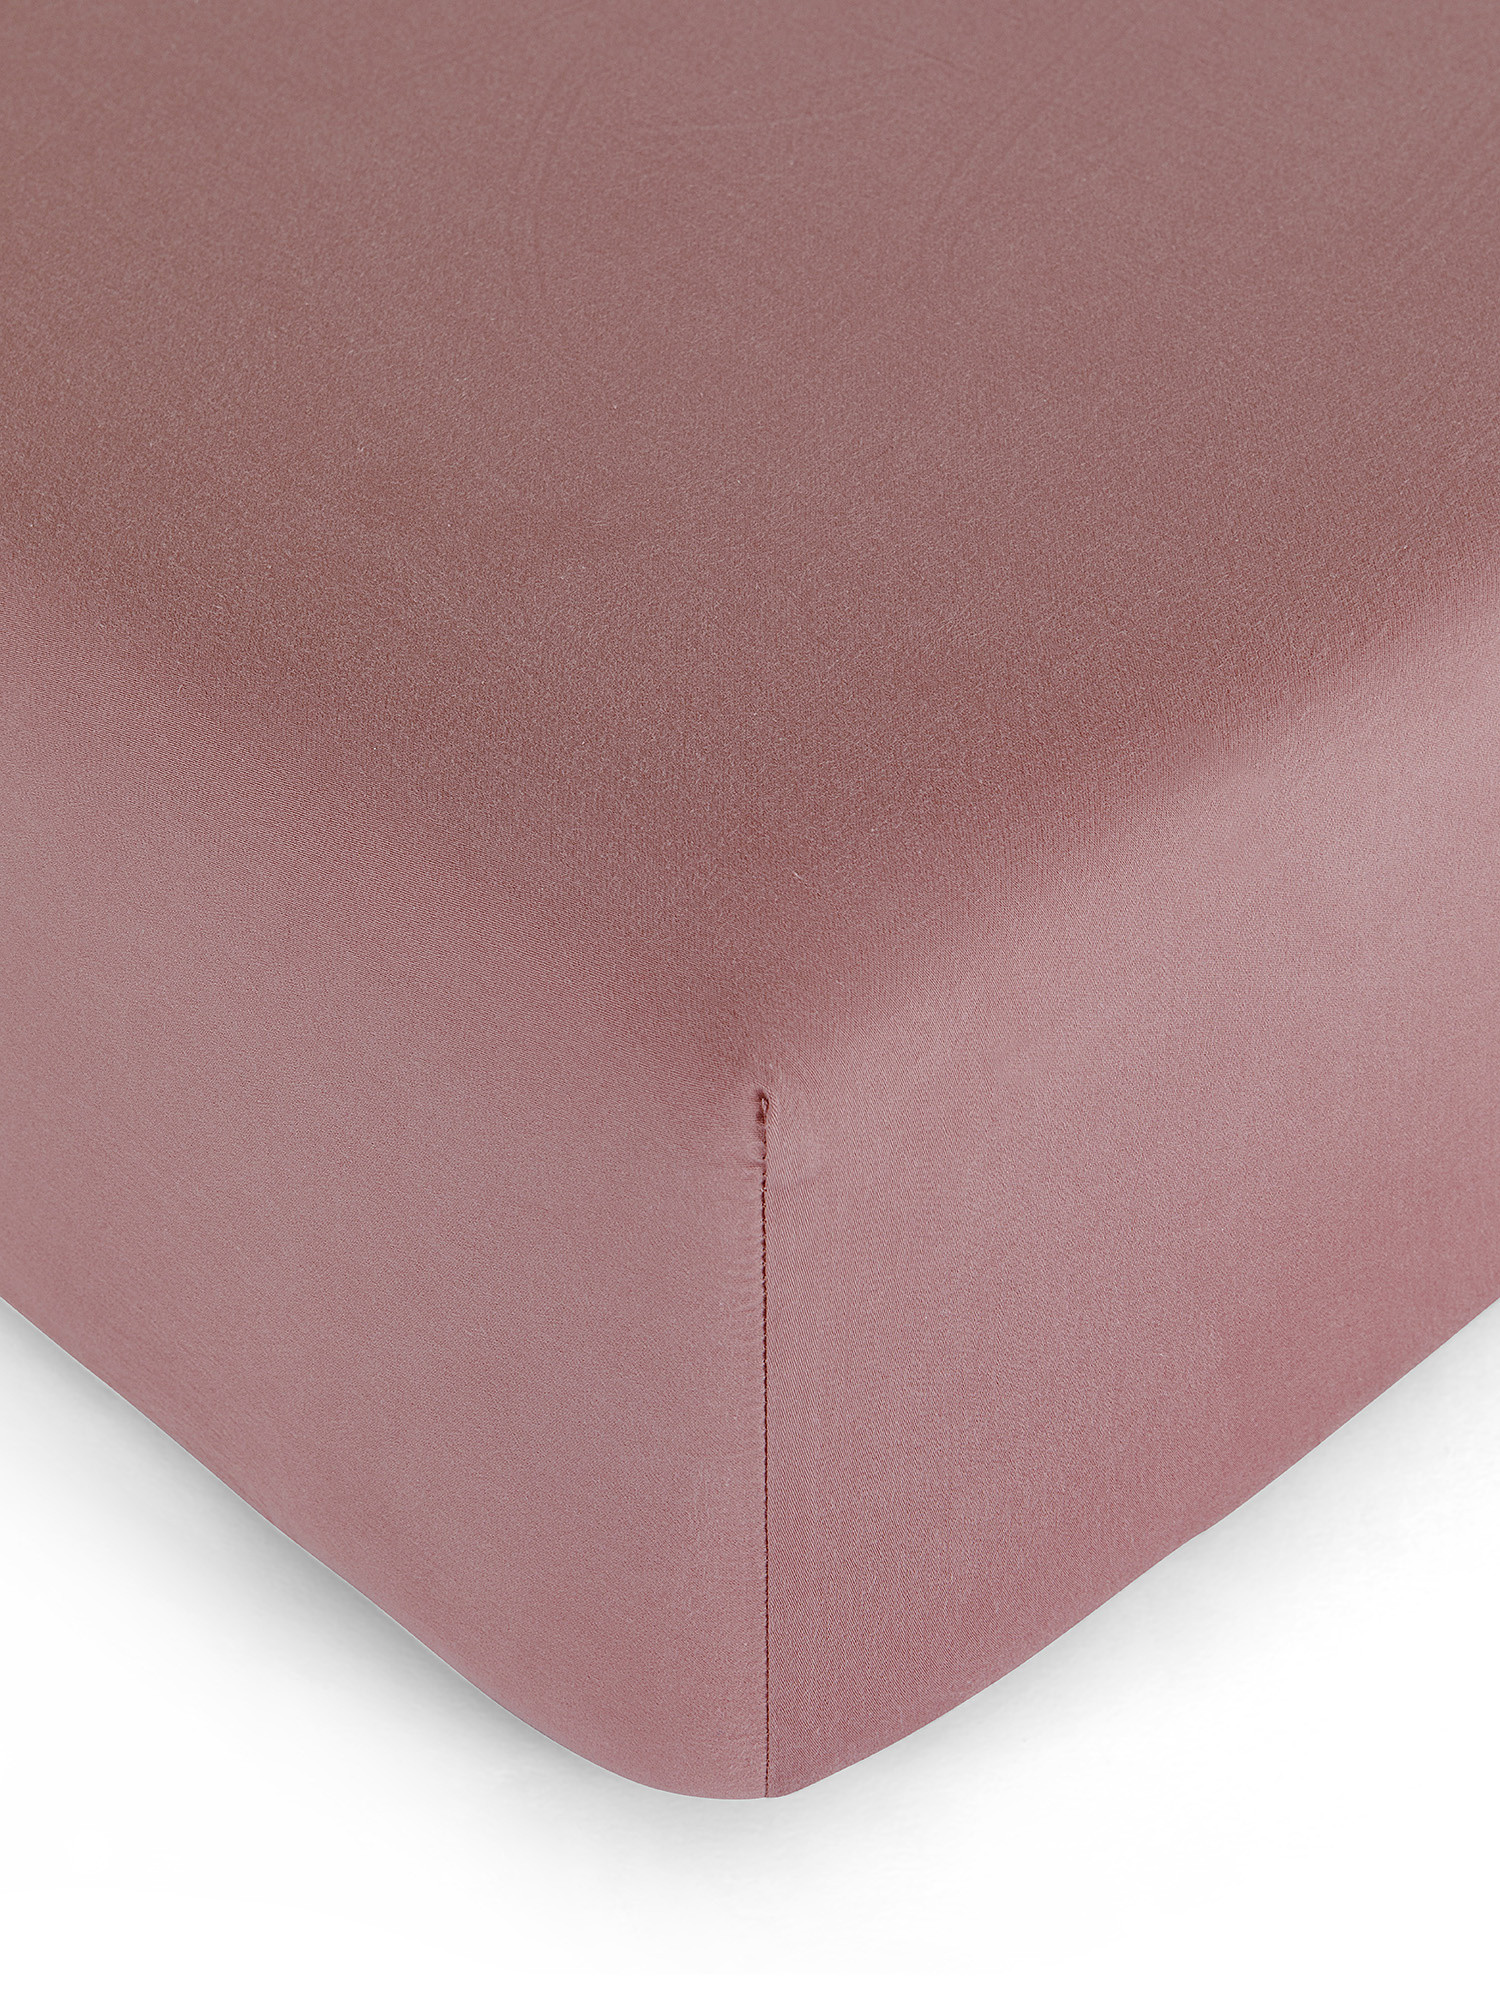 Zefiro solid color cotton satin fitted sheet, Dark Pink, large image number 0